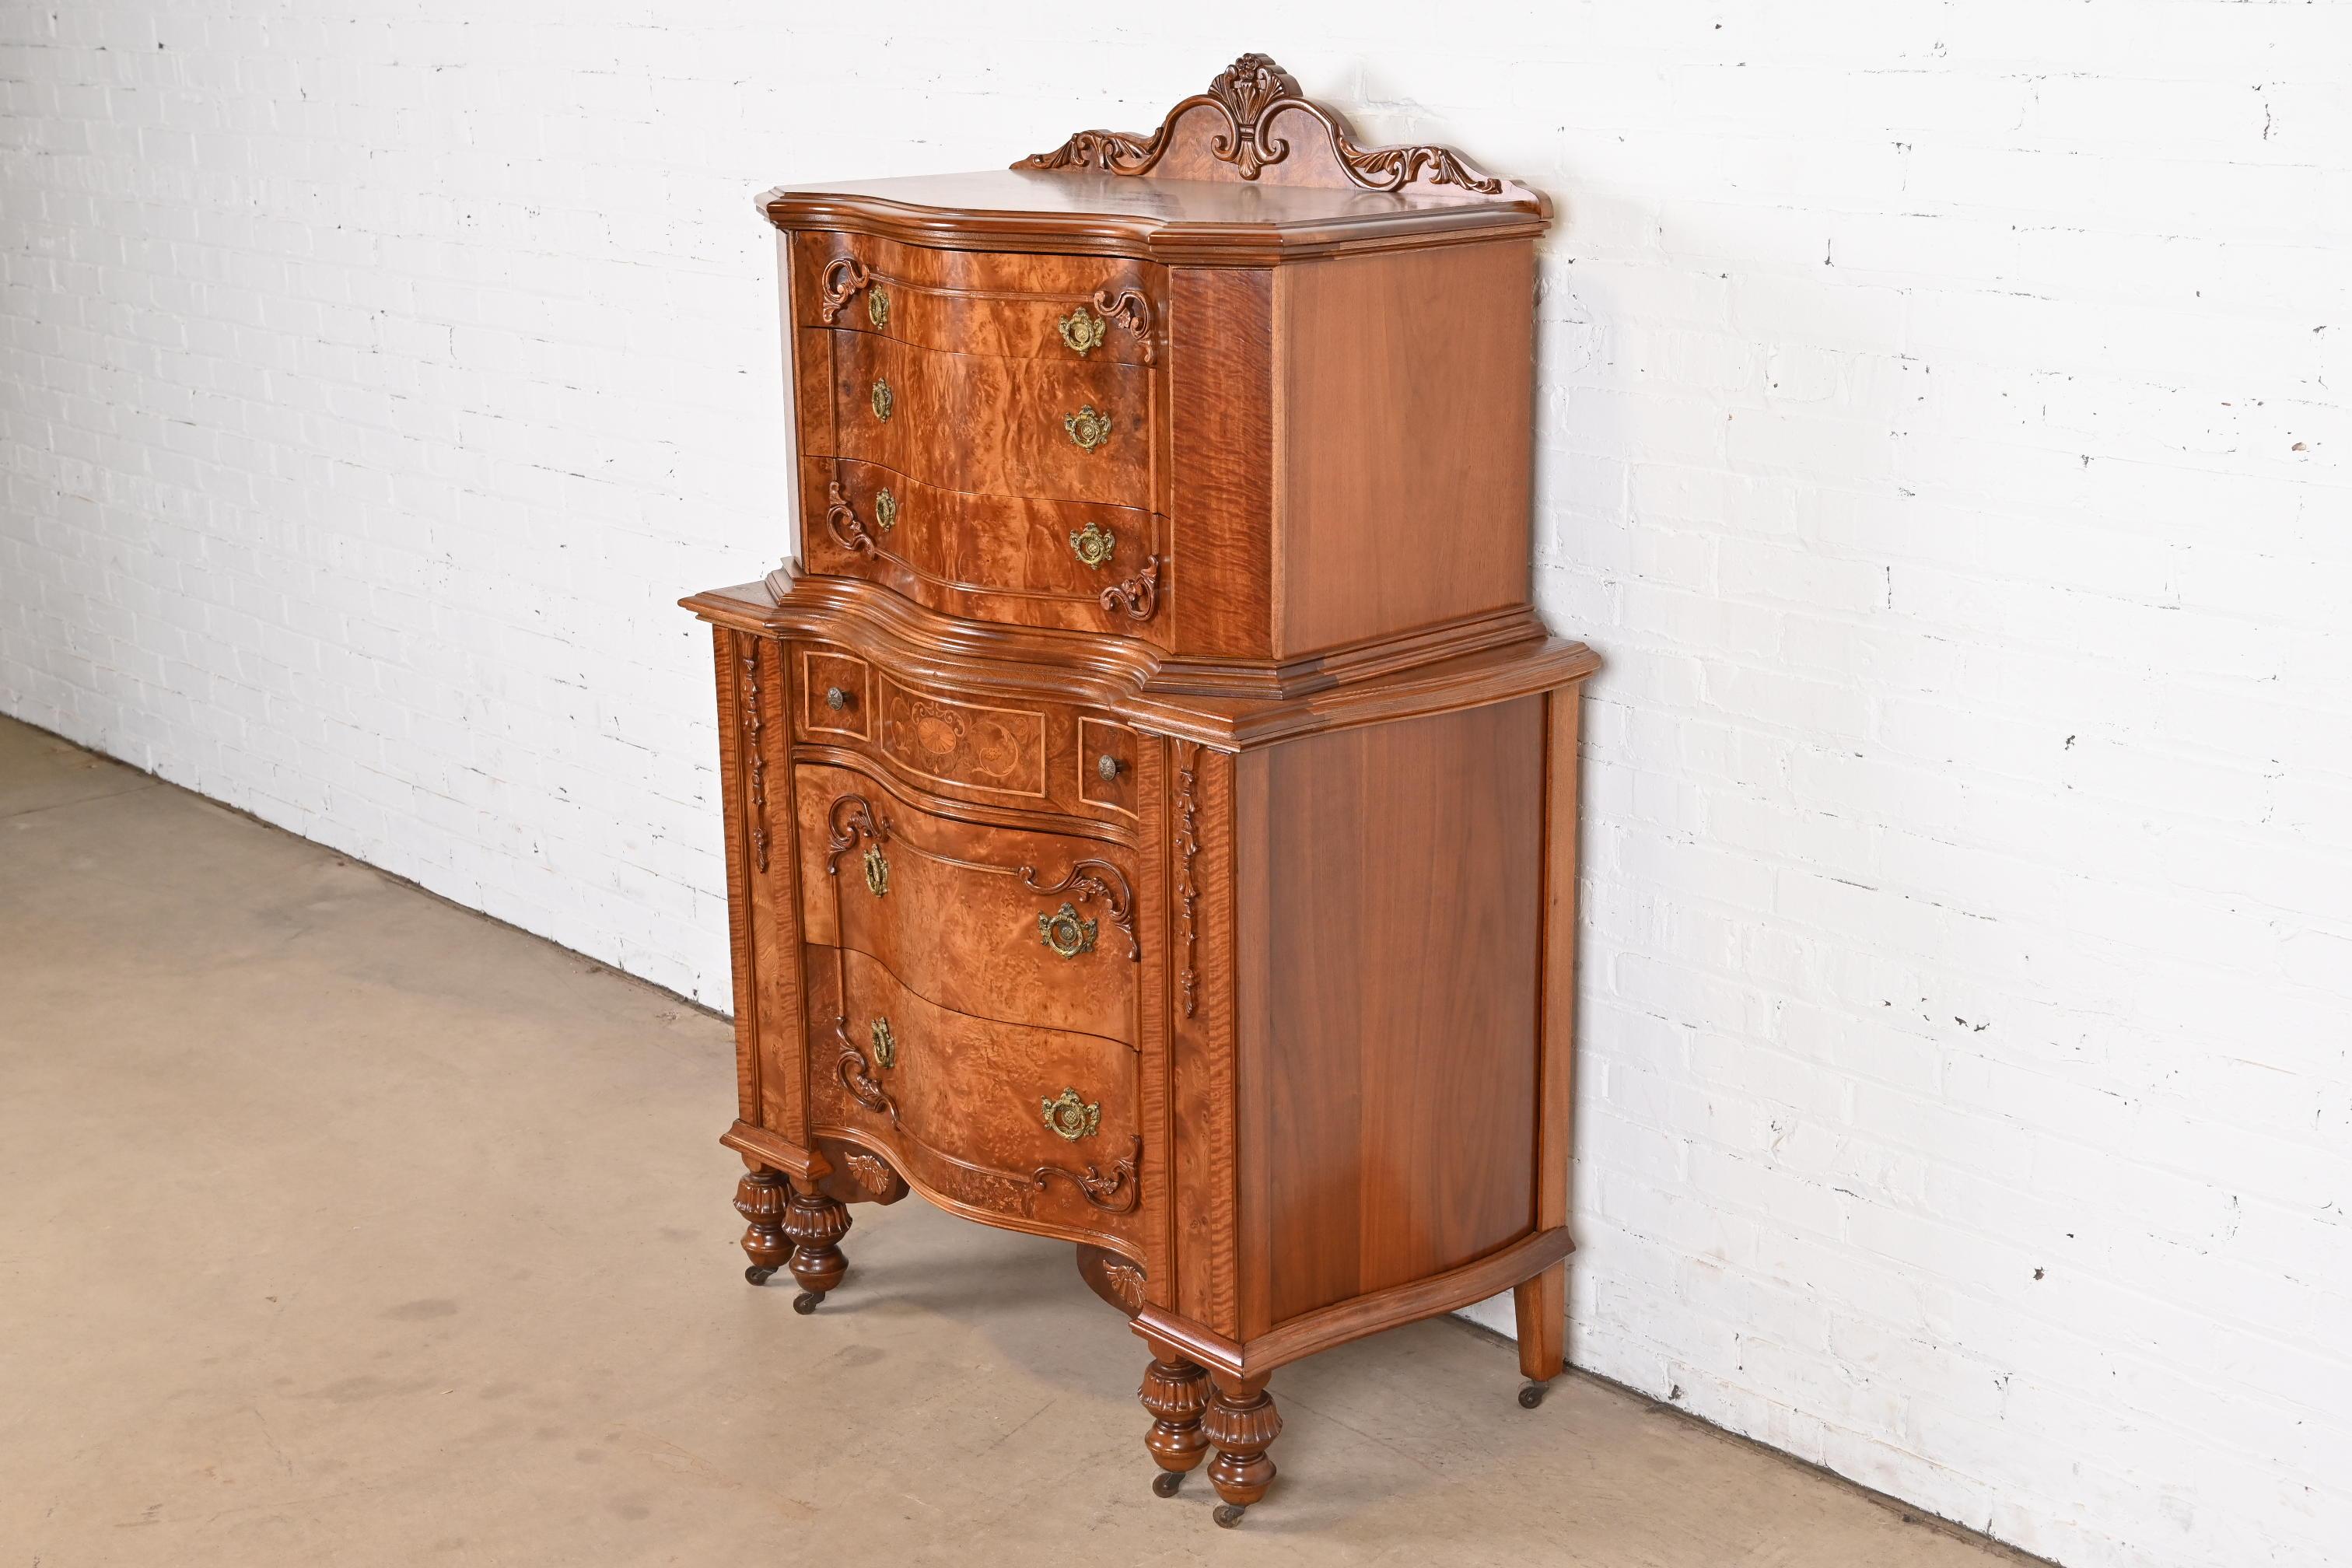 Antique French Art Deco Burled Walnut Inlaid Marquetry Highboy Dresser In Good Condition For Sale In South Bend, IN